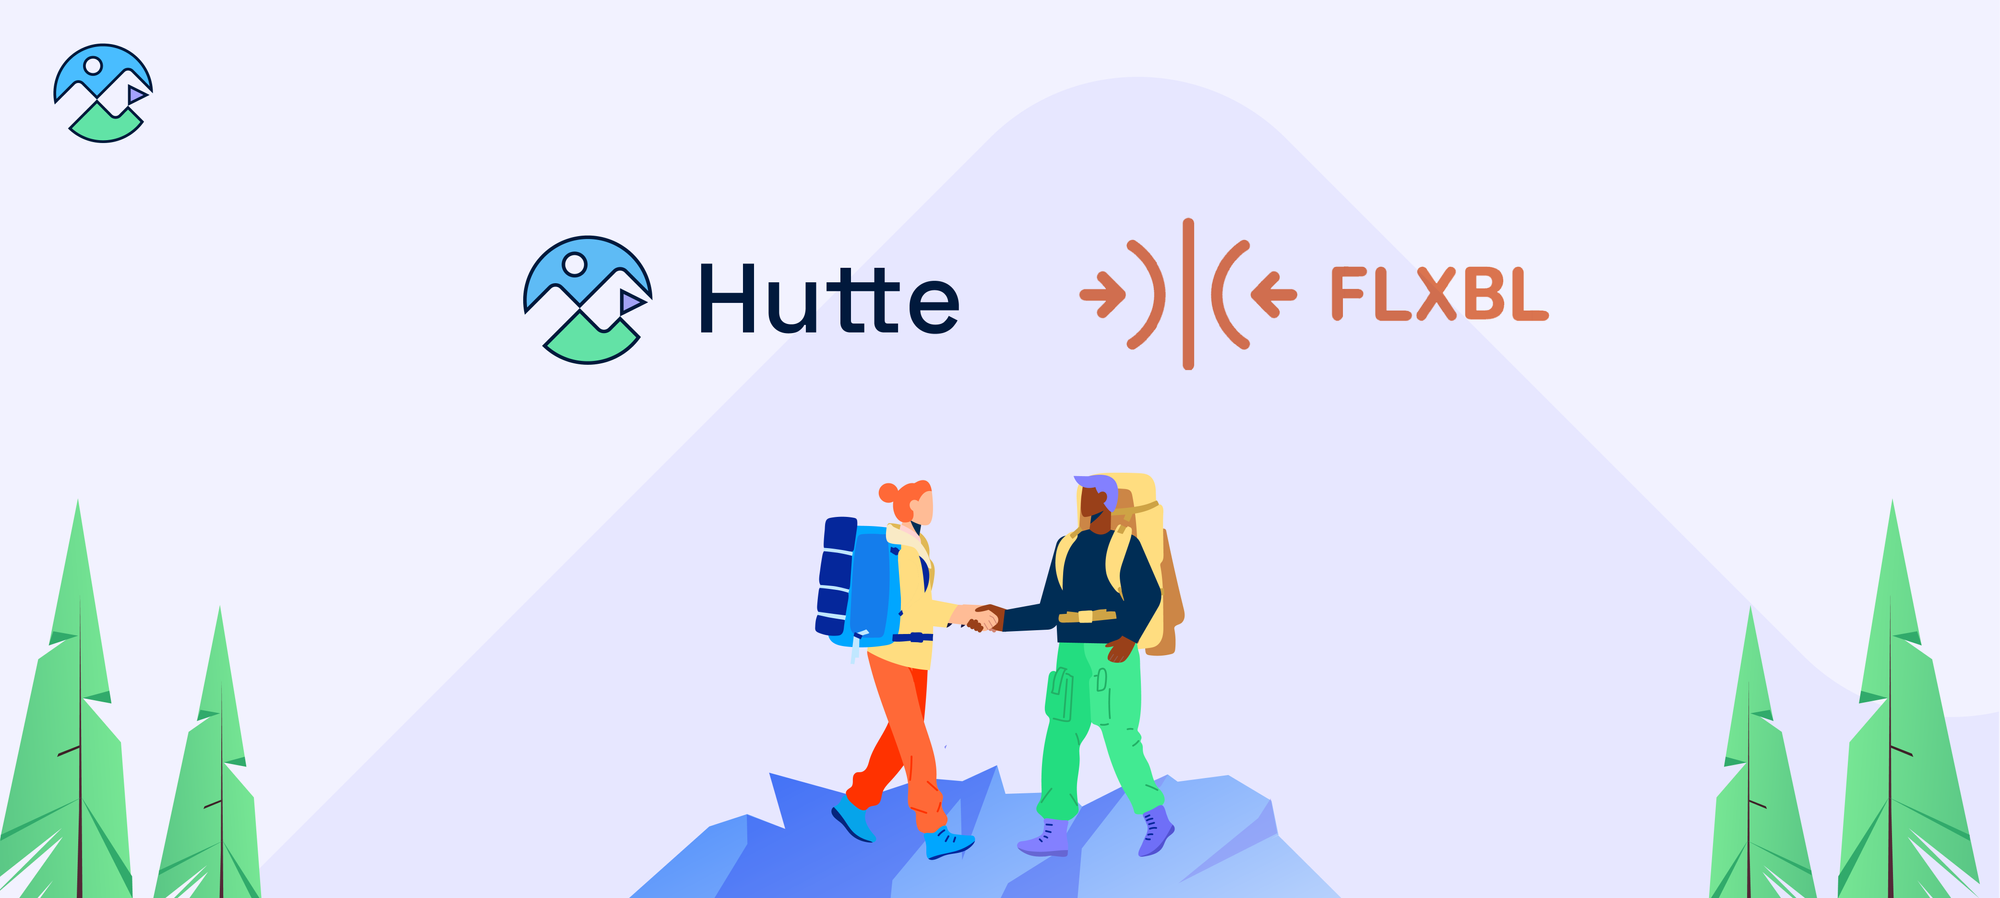 Enhance your Salesforce development lifecycle with Flxbl (“DX@Scale”) and Hutte